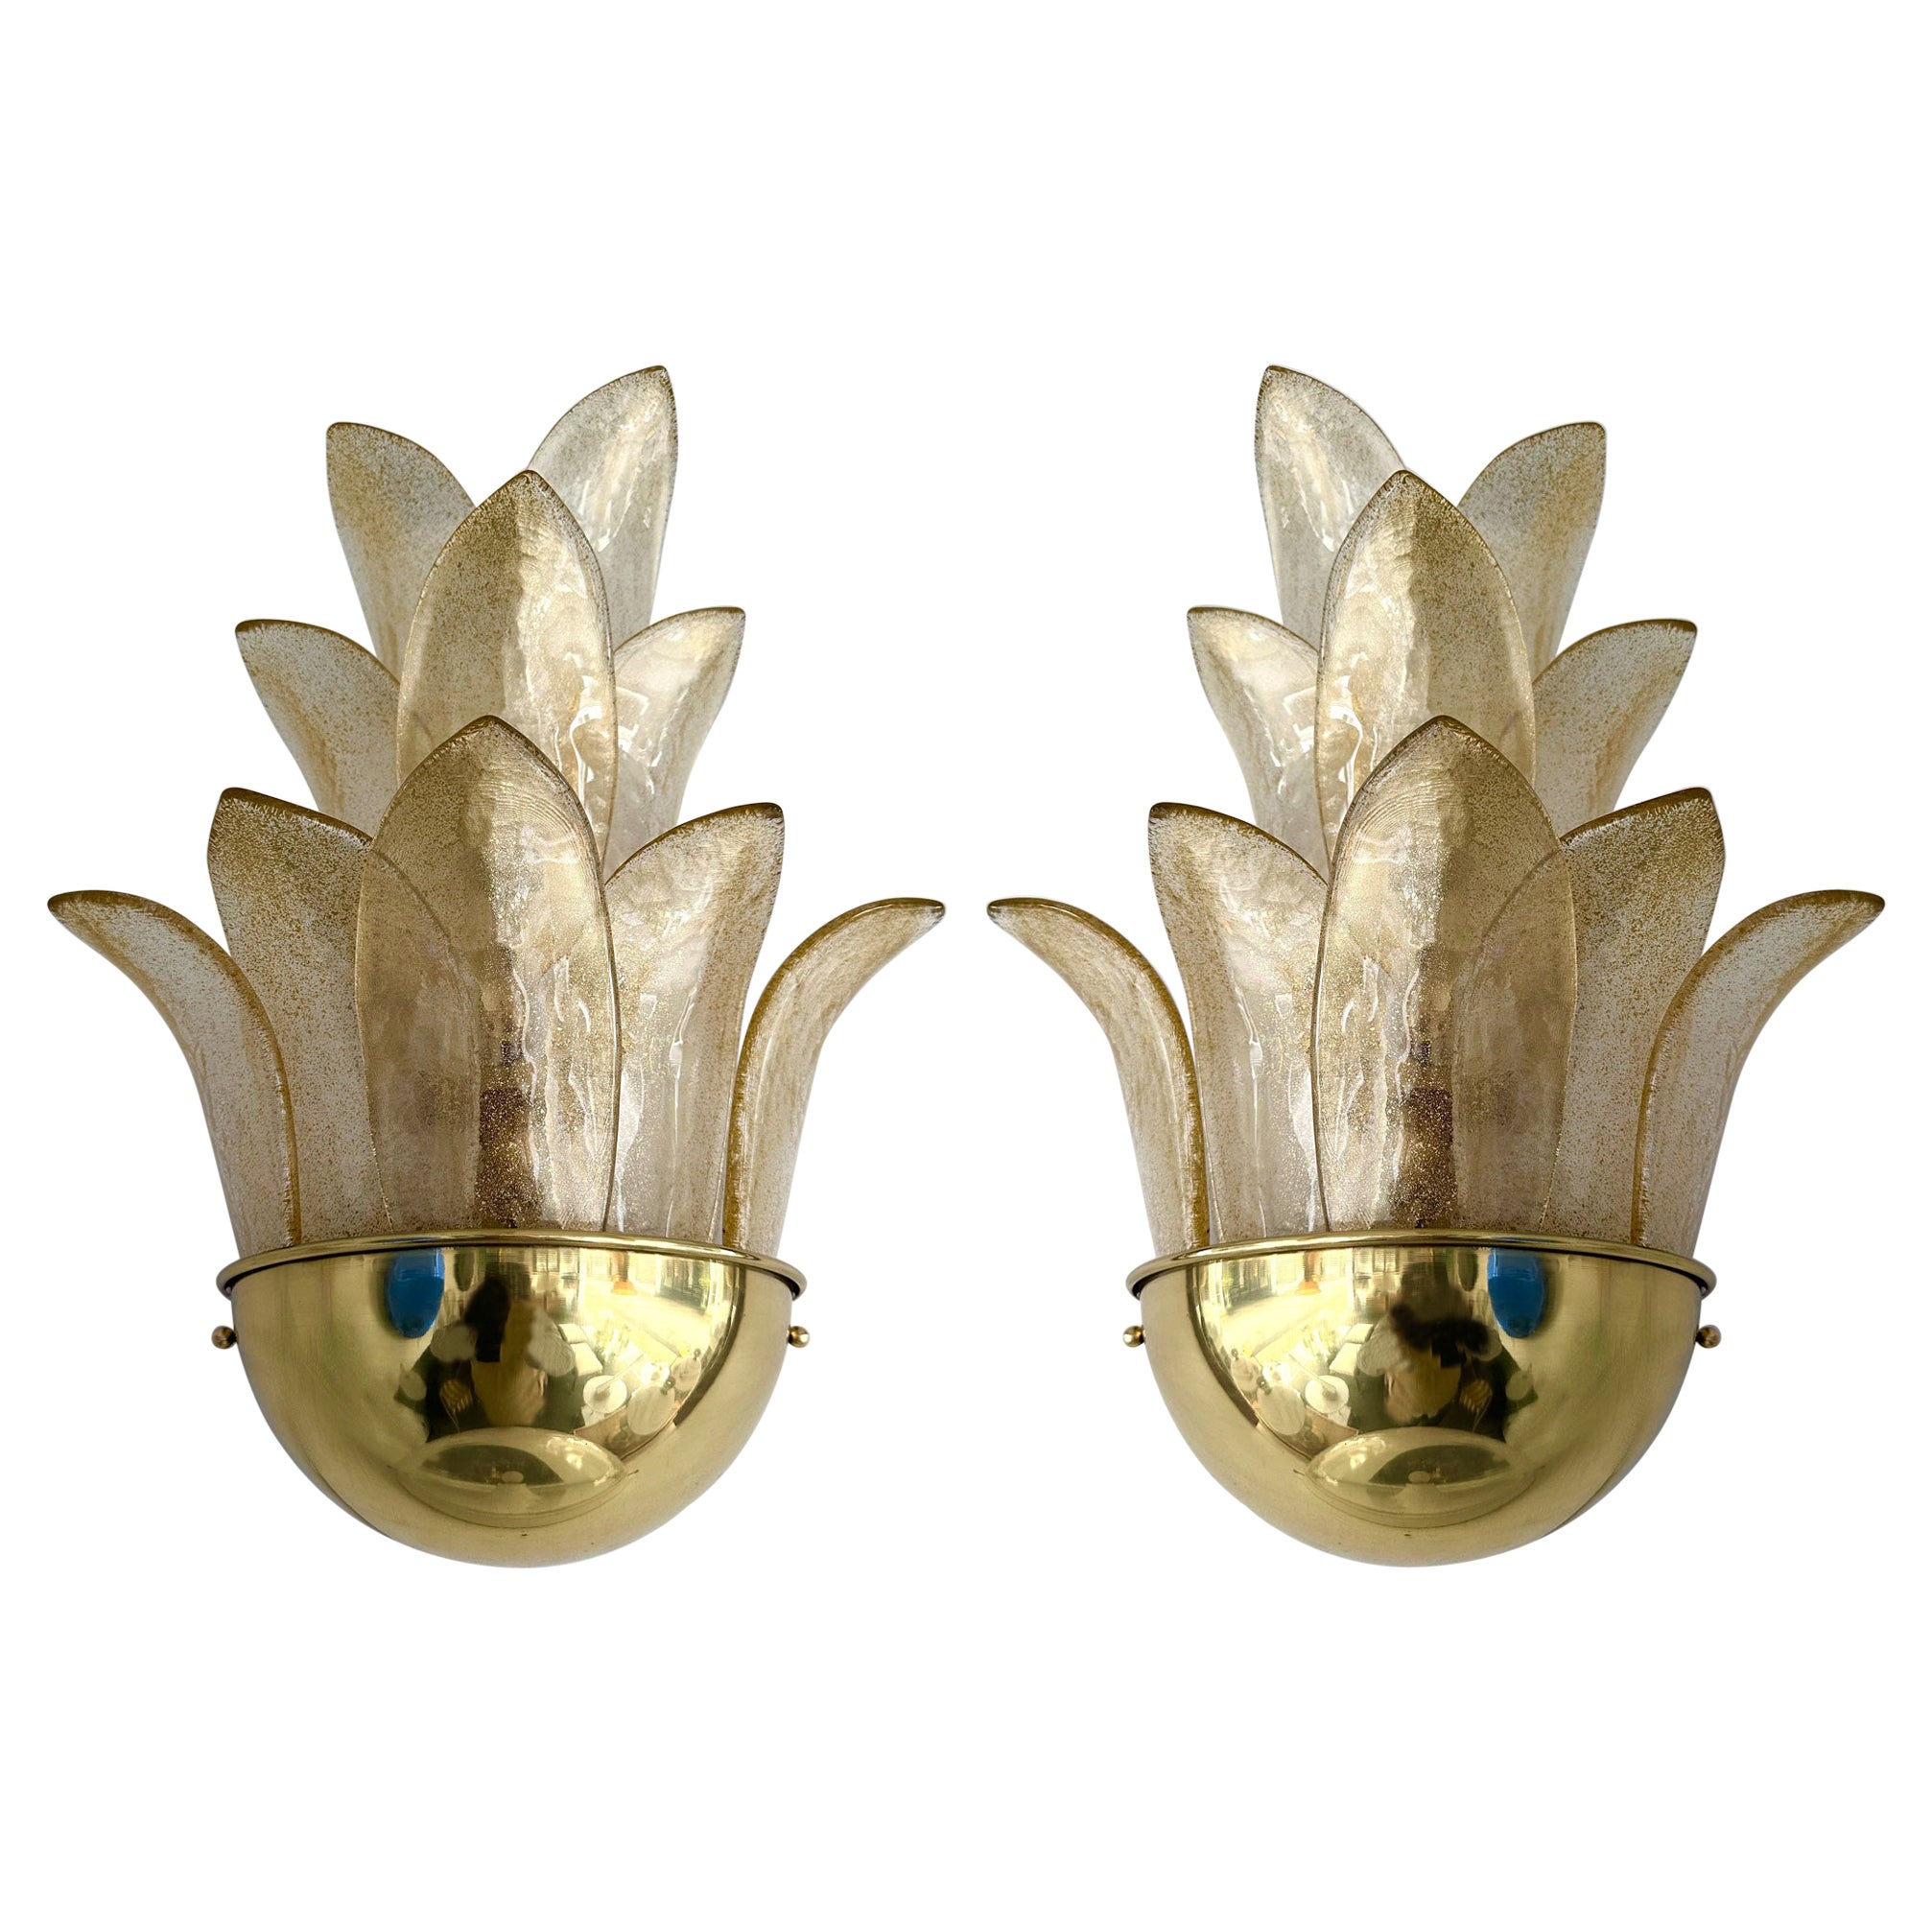 Contemporary Pair of Brass and Gilt Murano Glass Palm Tree Sconces, Italy